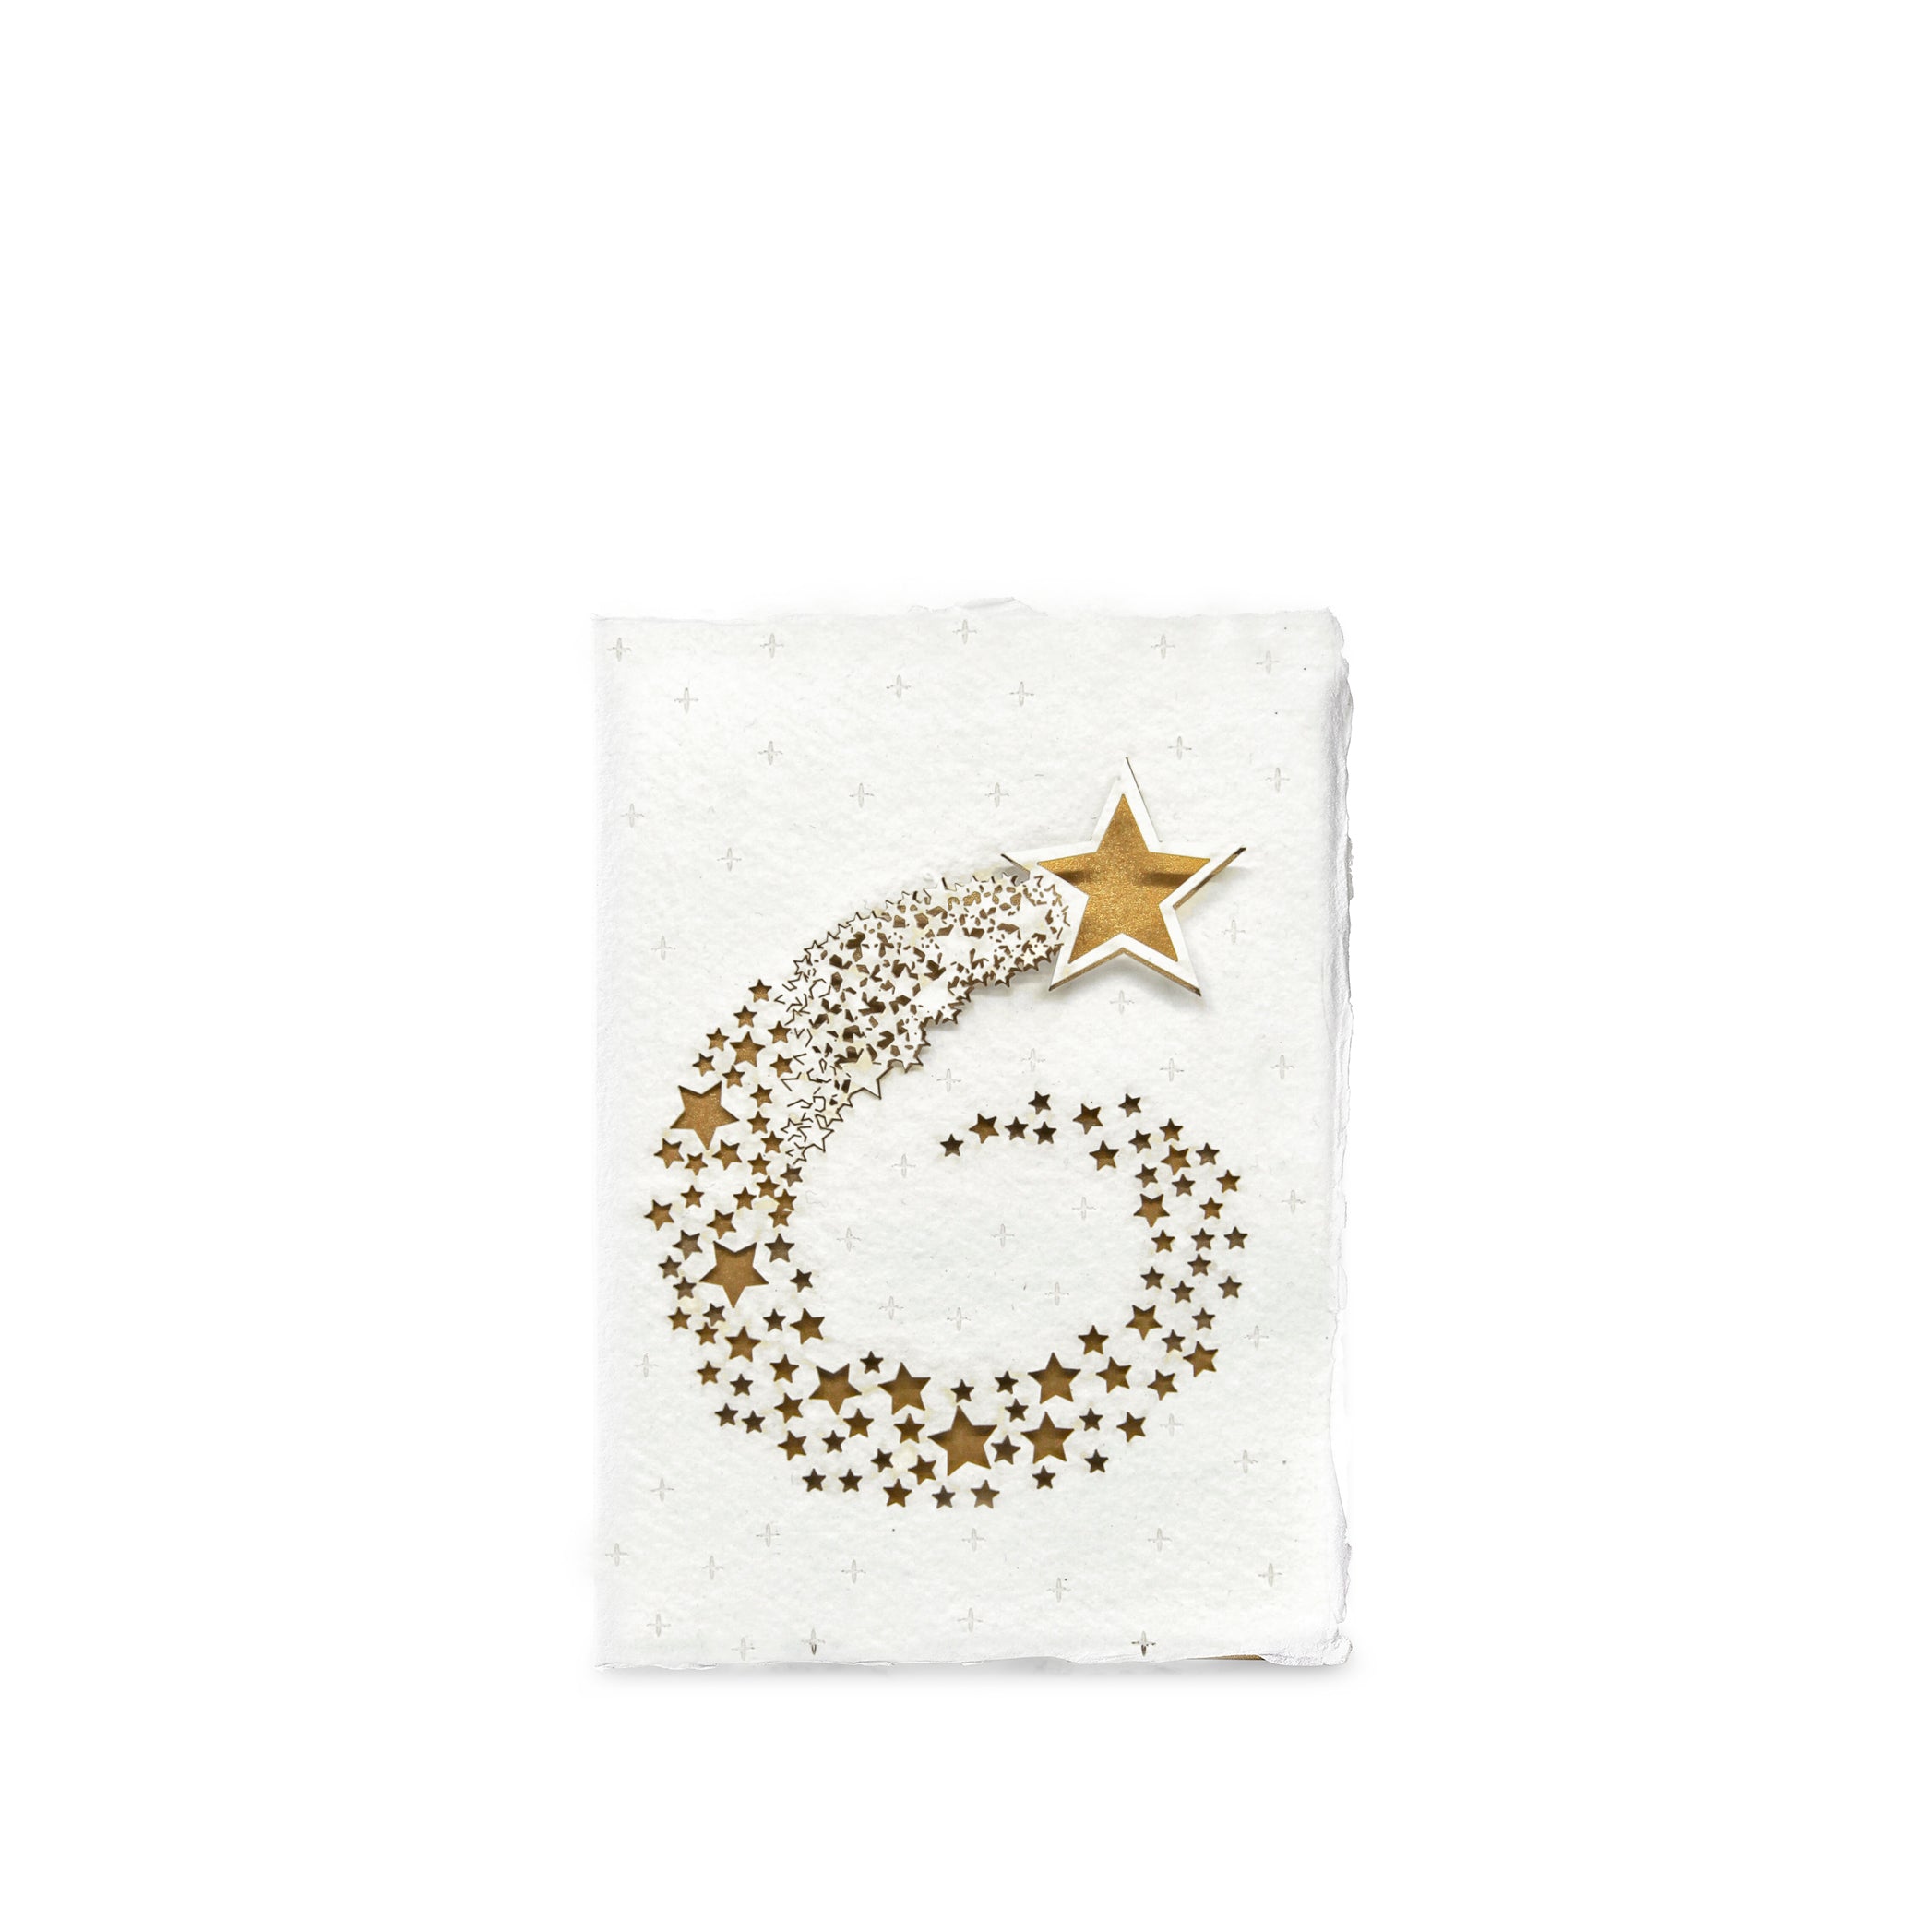 Handmade Paper Greeting Card with Falling Star, 15cm x 10cm